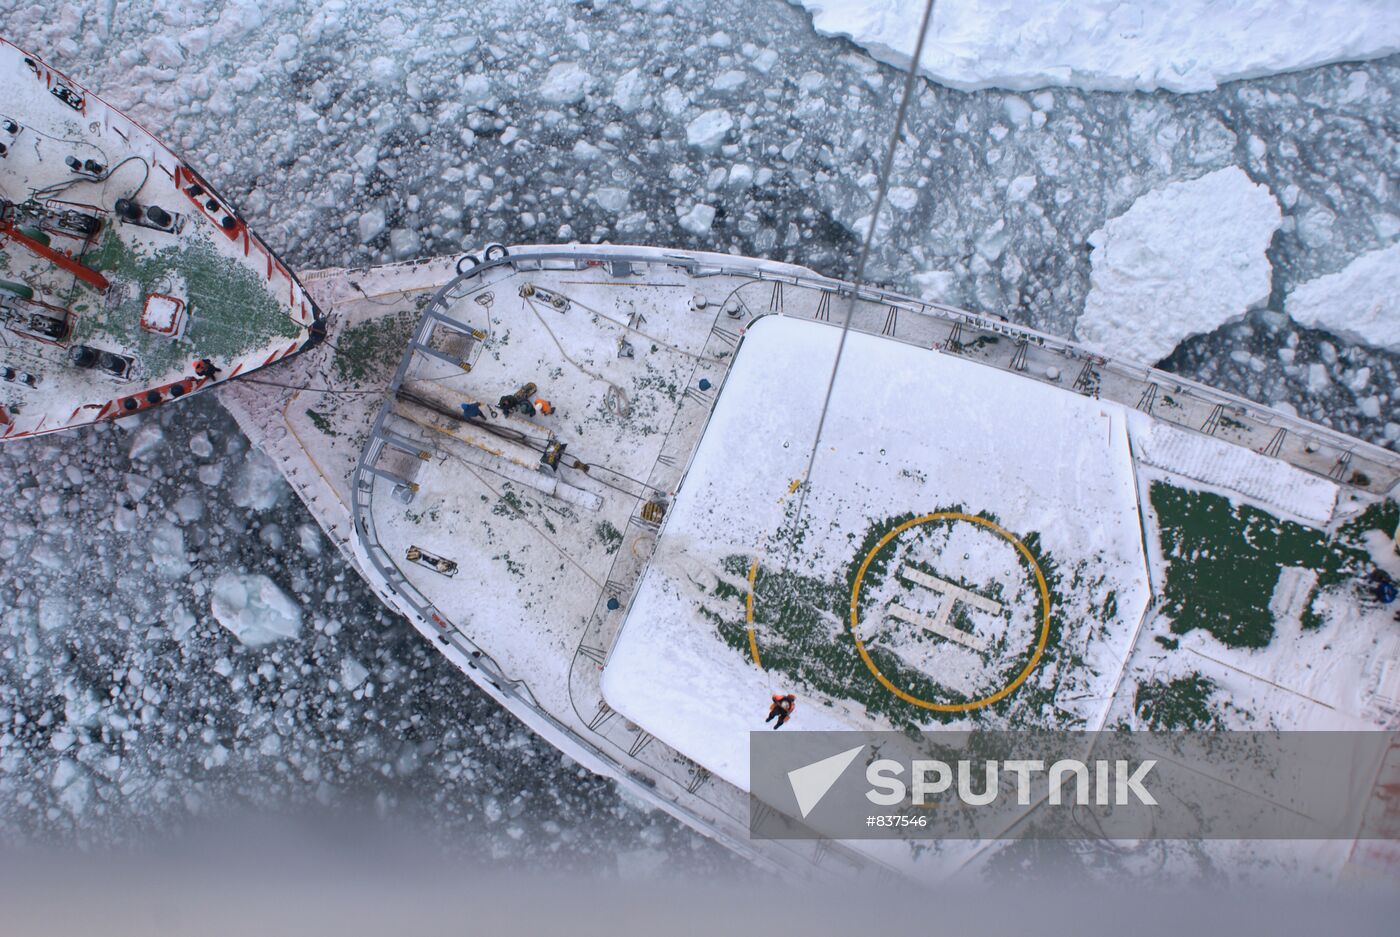 Icebreakers leading out ice-trapped ships in Sea of Okhotsk